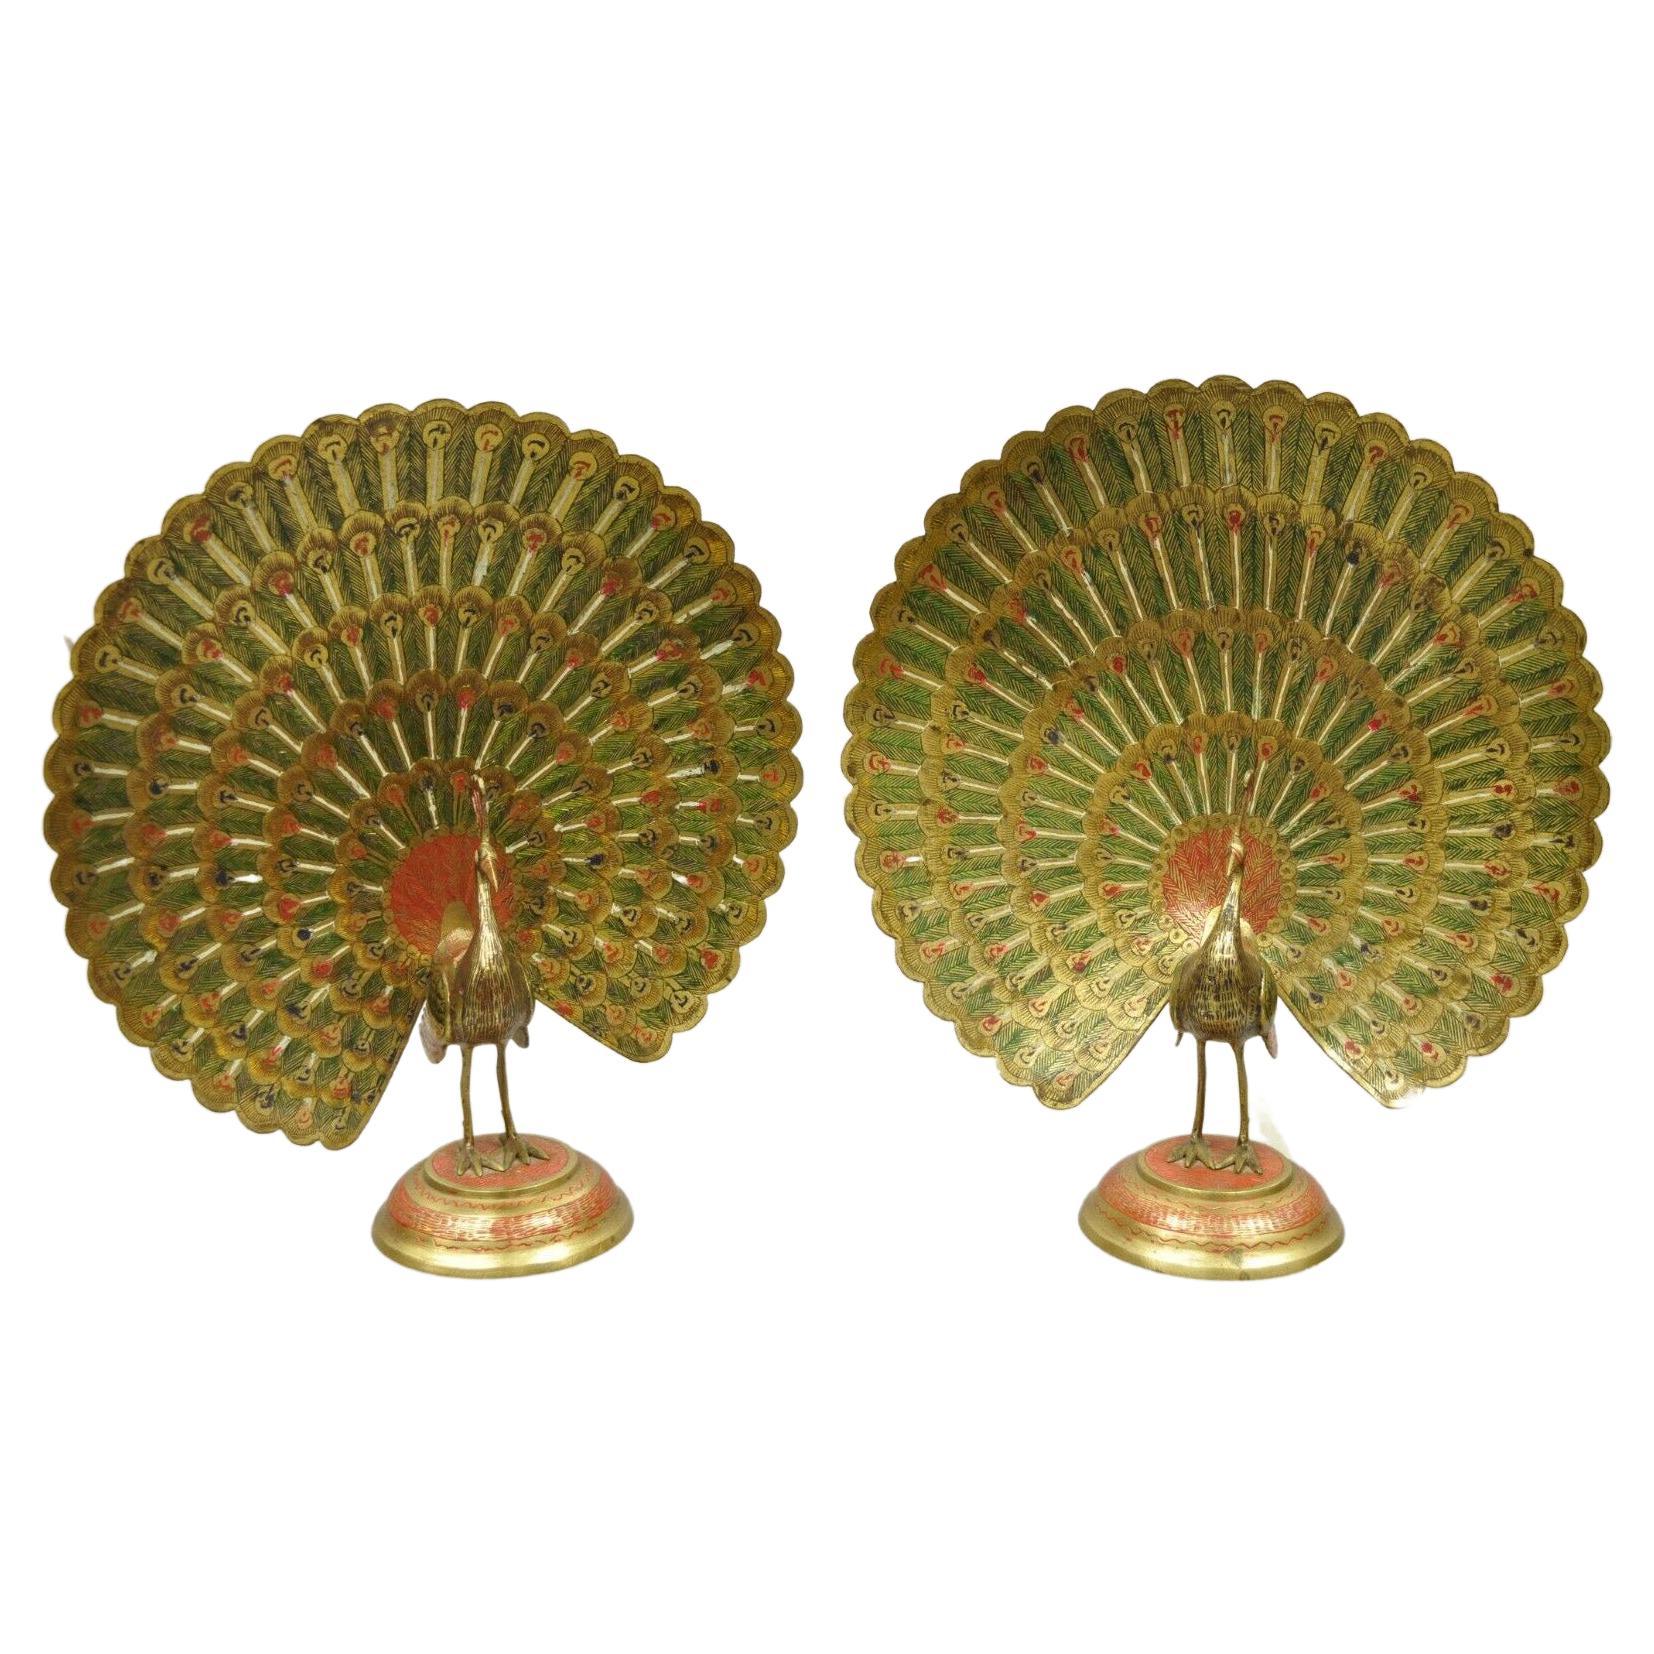 Vintage Brass Hollywood Regency Red Green Painted Peacock Figurines, a Pair